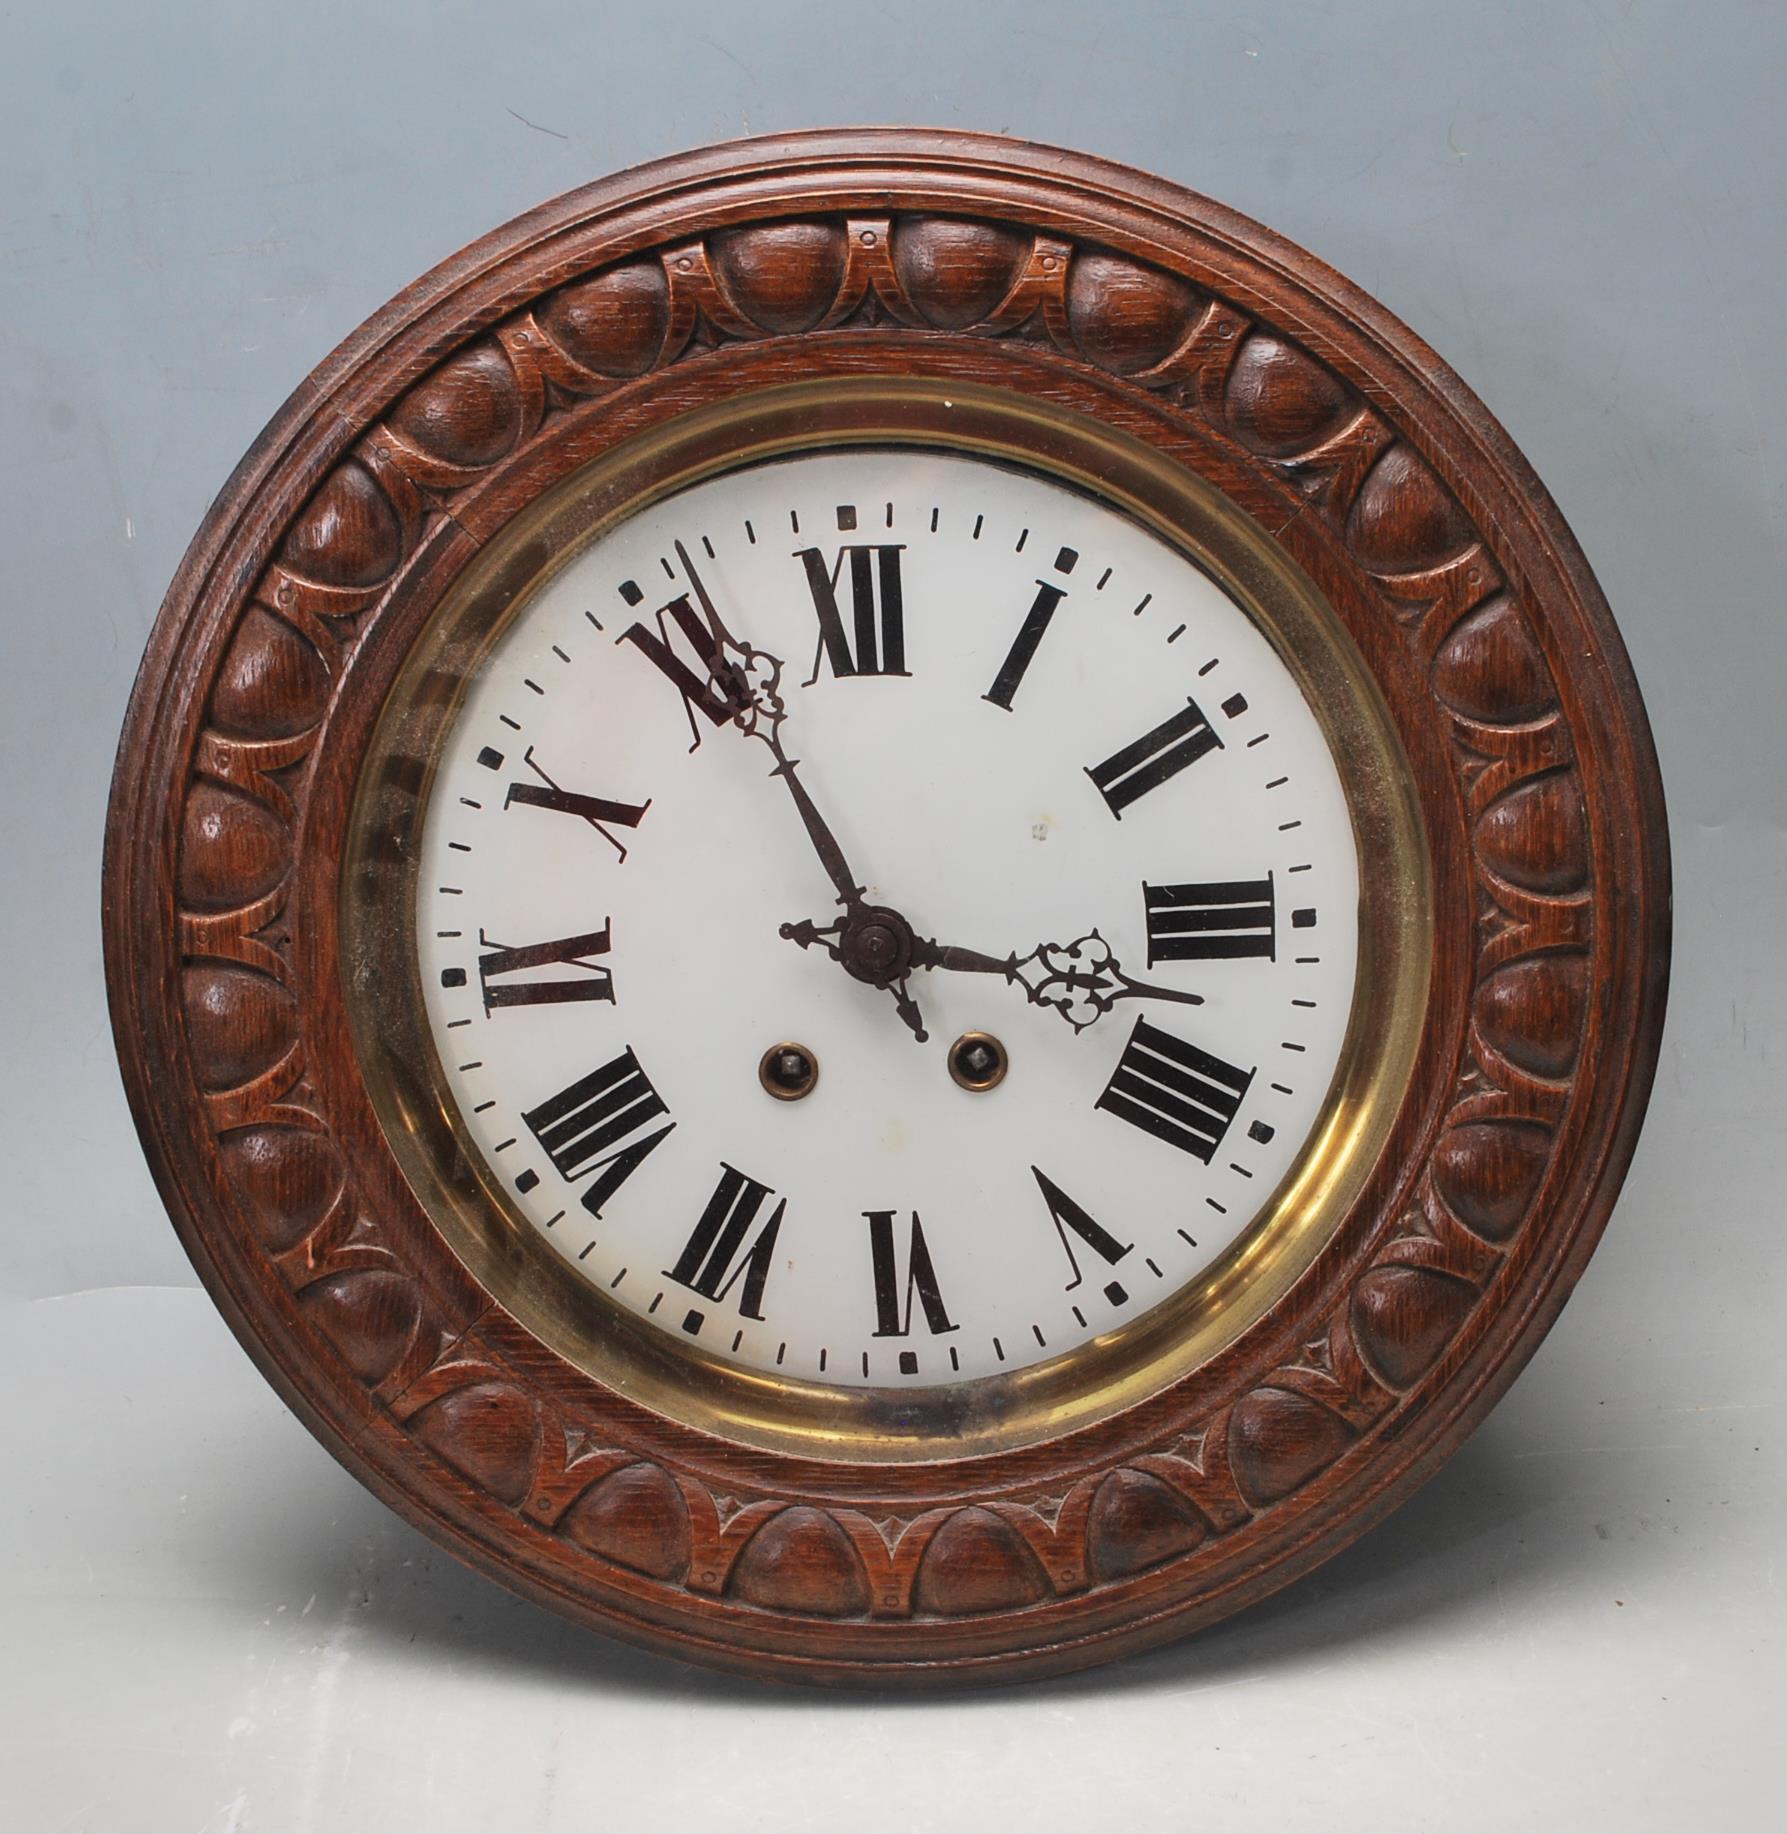 A 19TH CENTURY VICTORIAN FRENCH OAK MAHOGANY STATION / POST OFFICE CLOCK - Image 2 of 4